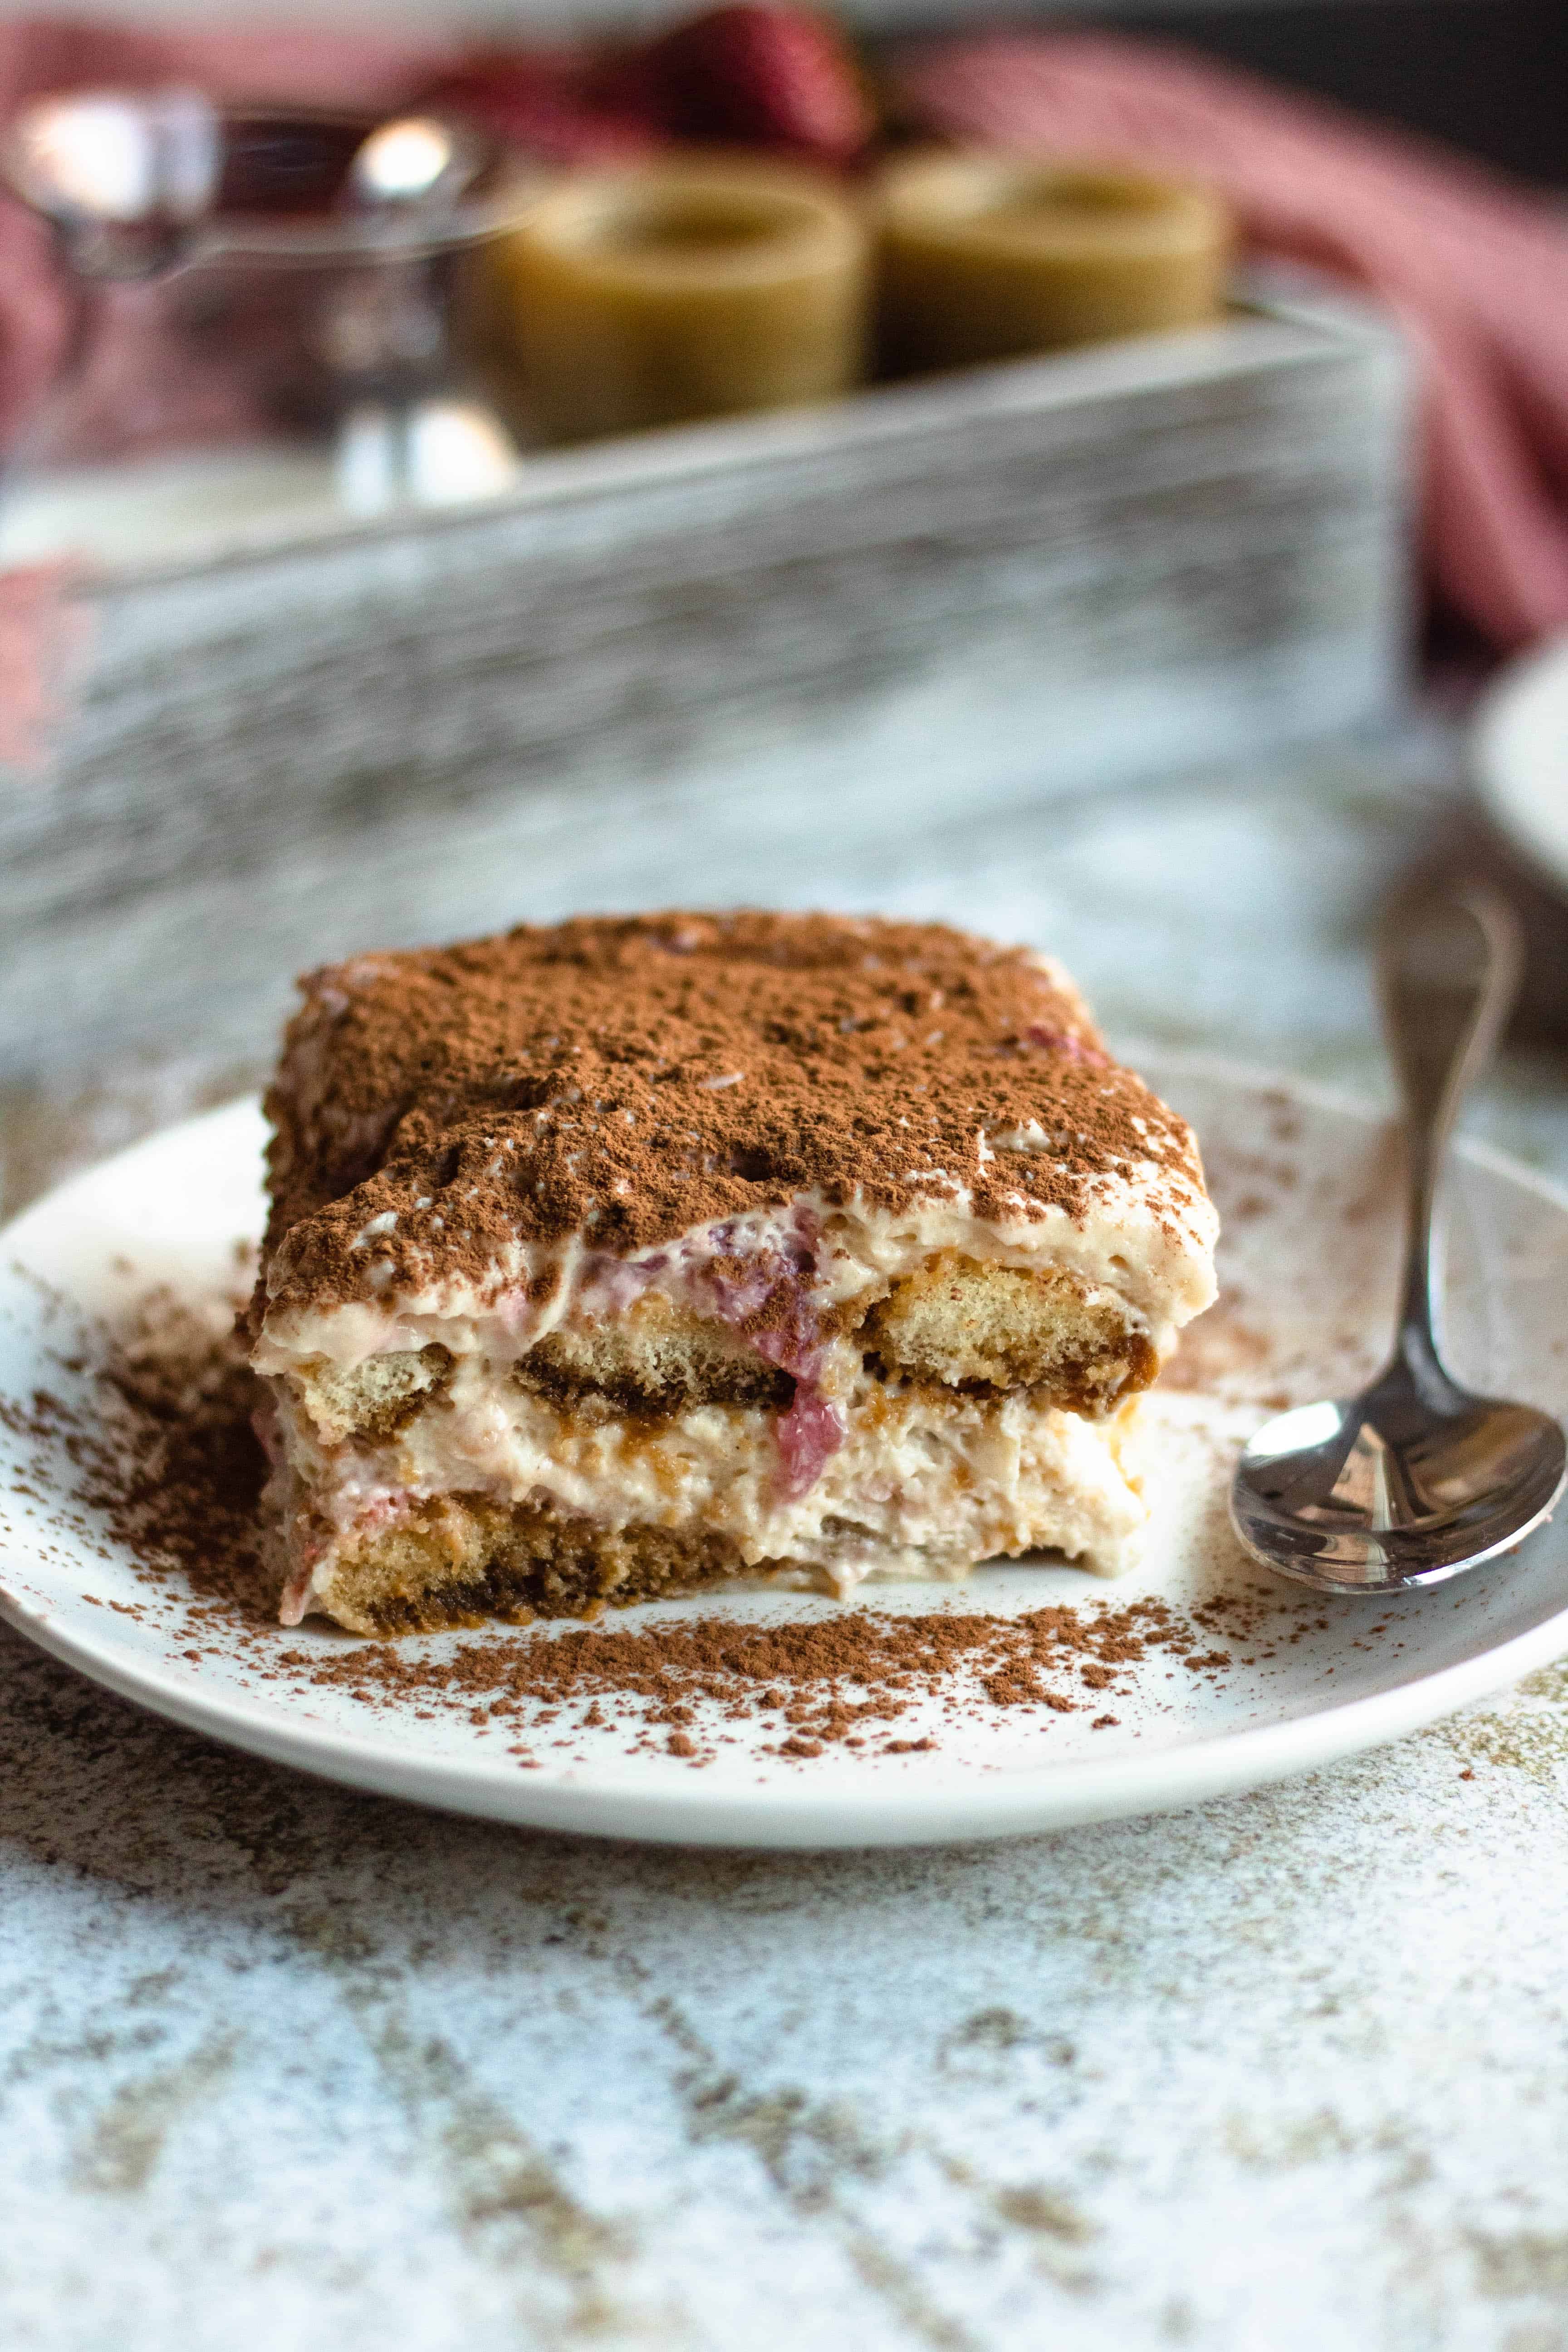 Slice of strawberry tiramisu, an Italian dessert recipe, dusted with cocoa powder on a plate with a spoon on the side.